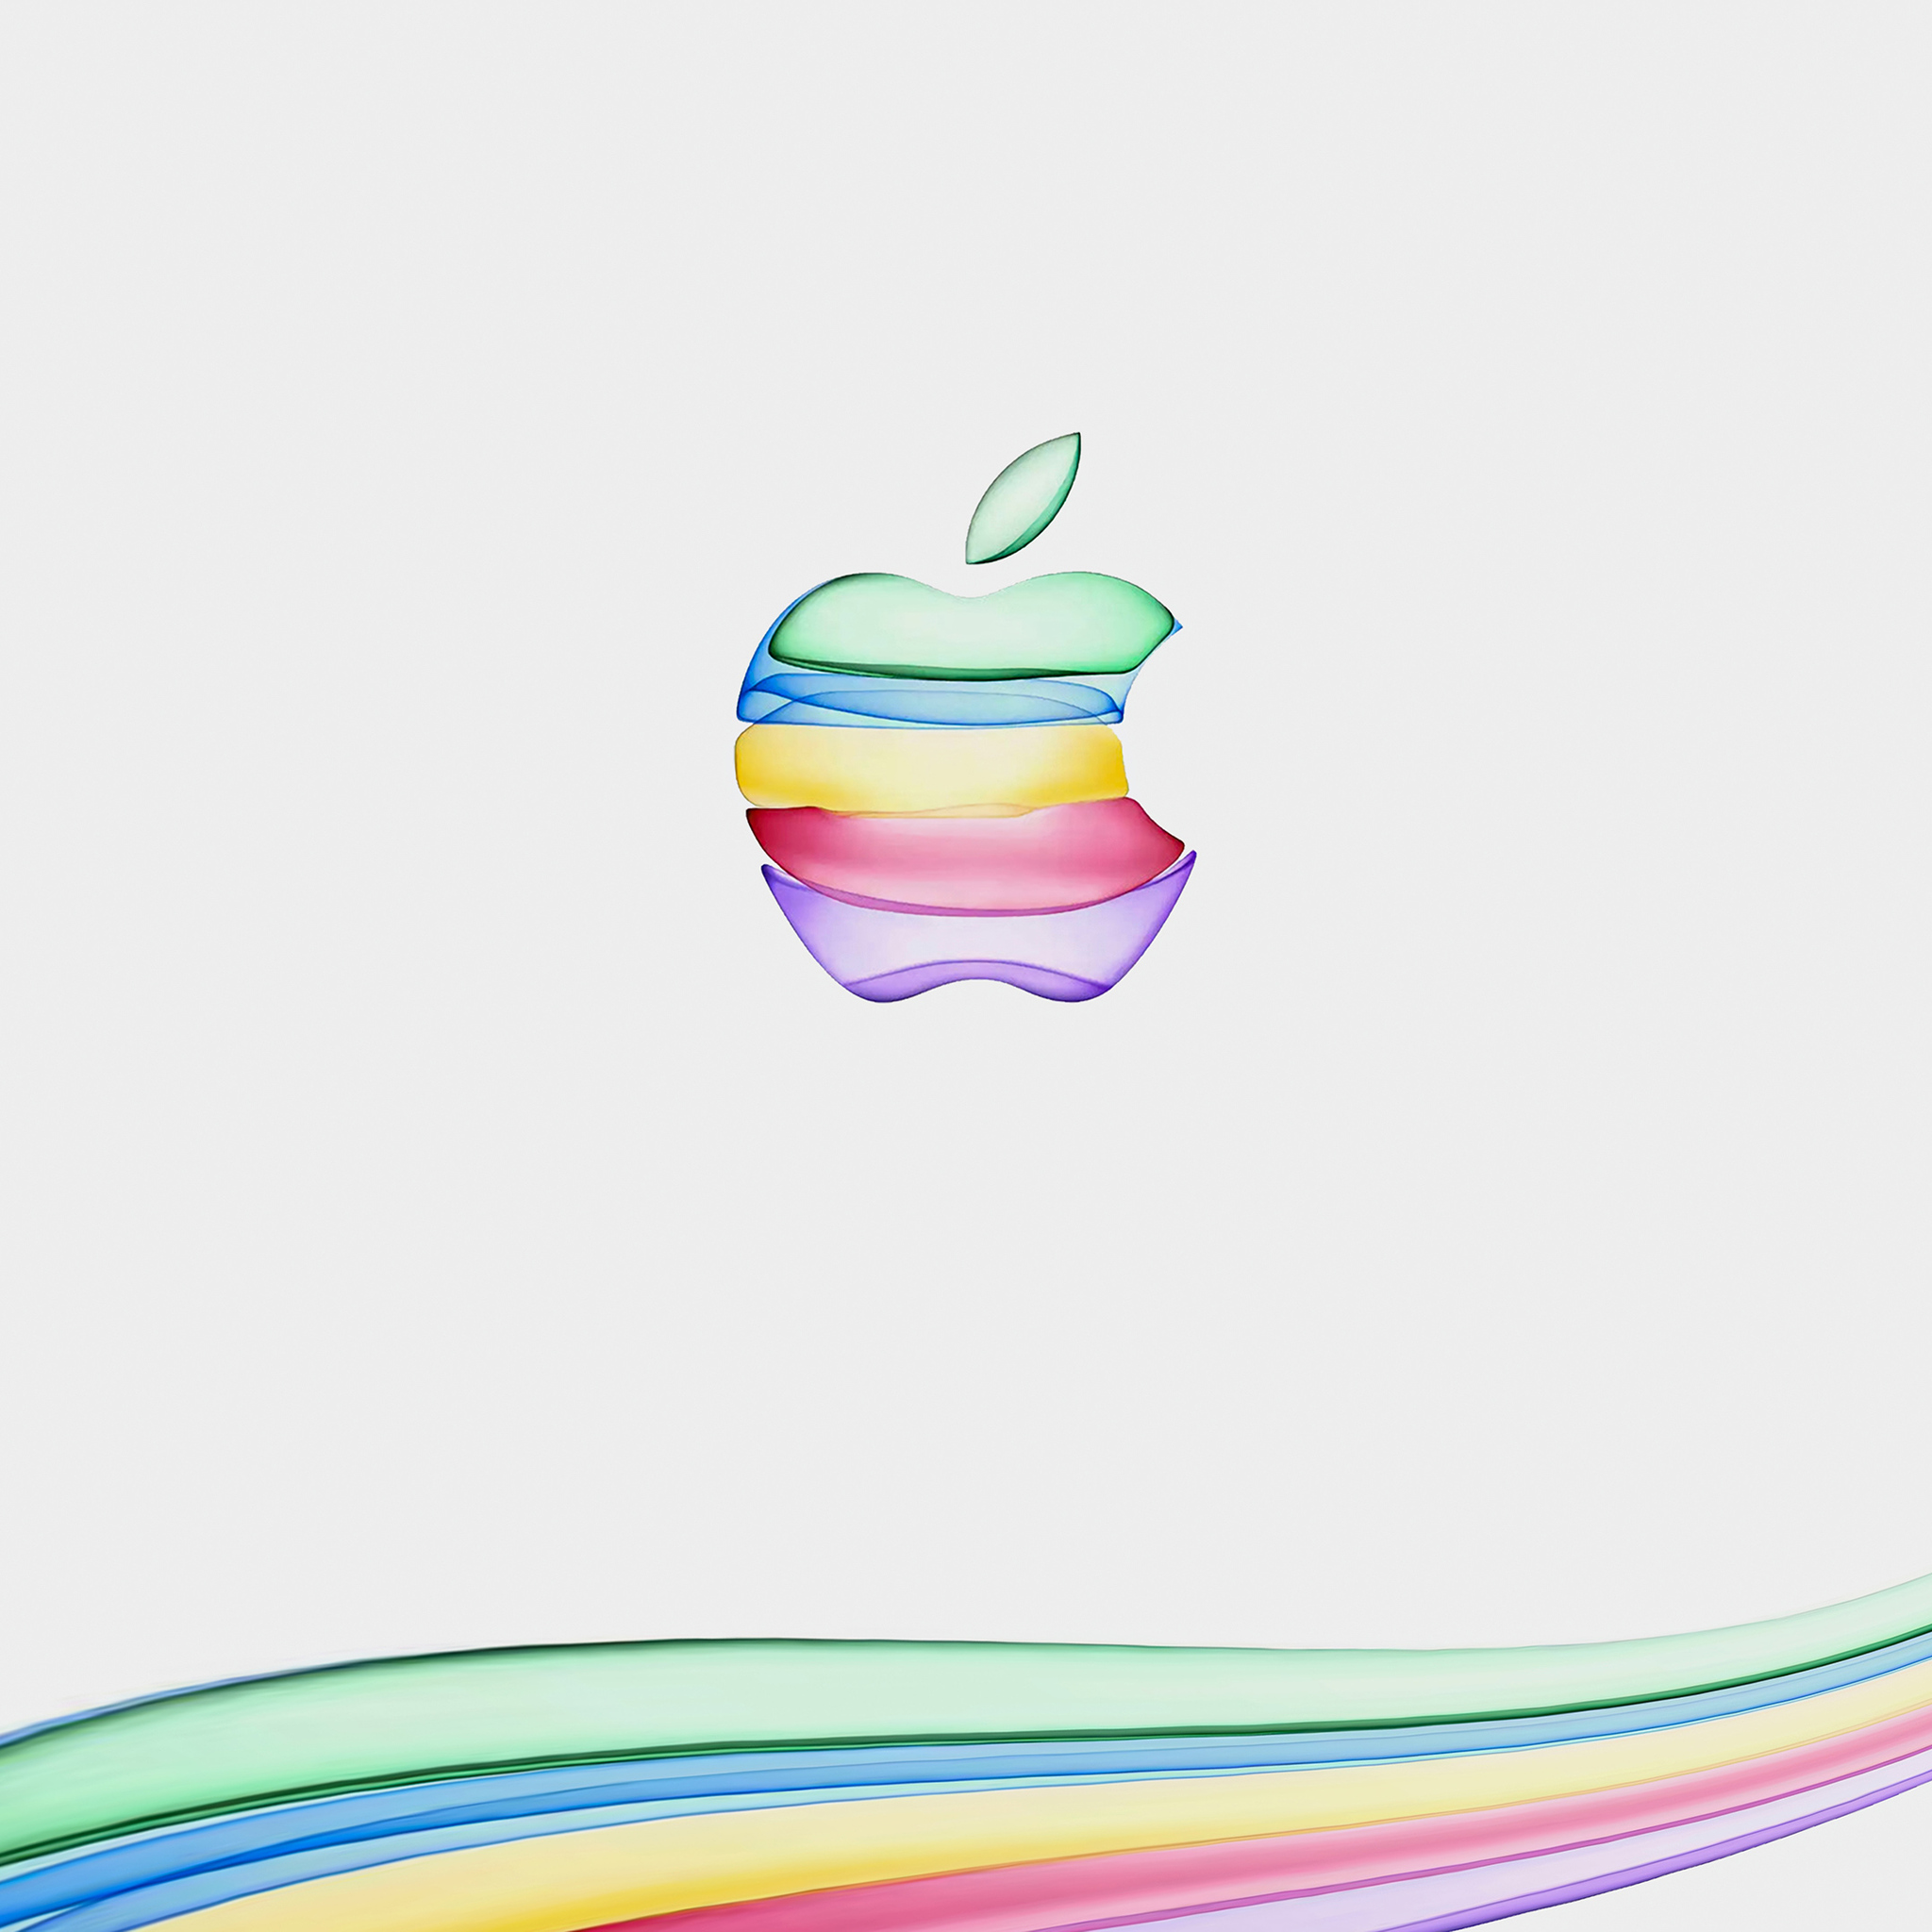 2048x2048 Apple New Colorful Logo 4k Ipad Air HD 4k Wallpapers, Images ...